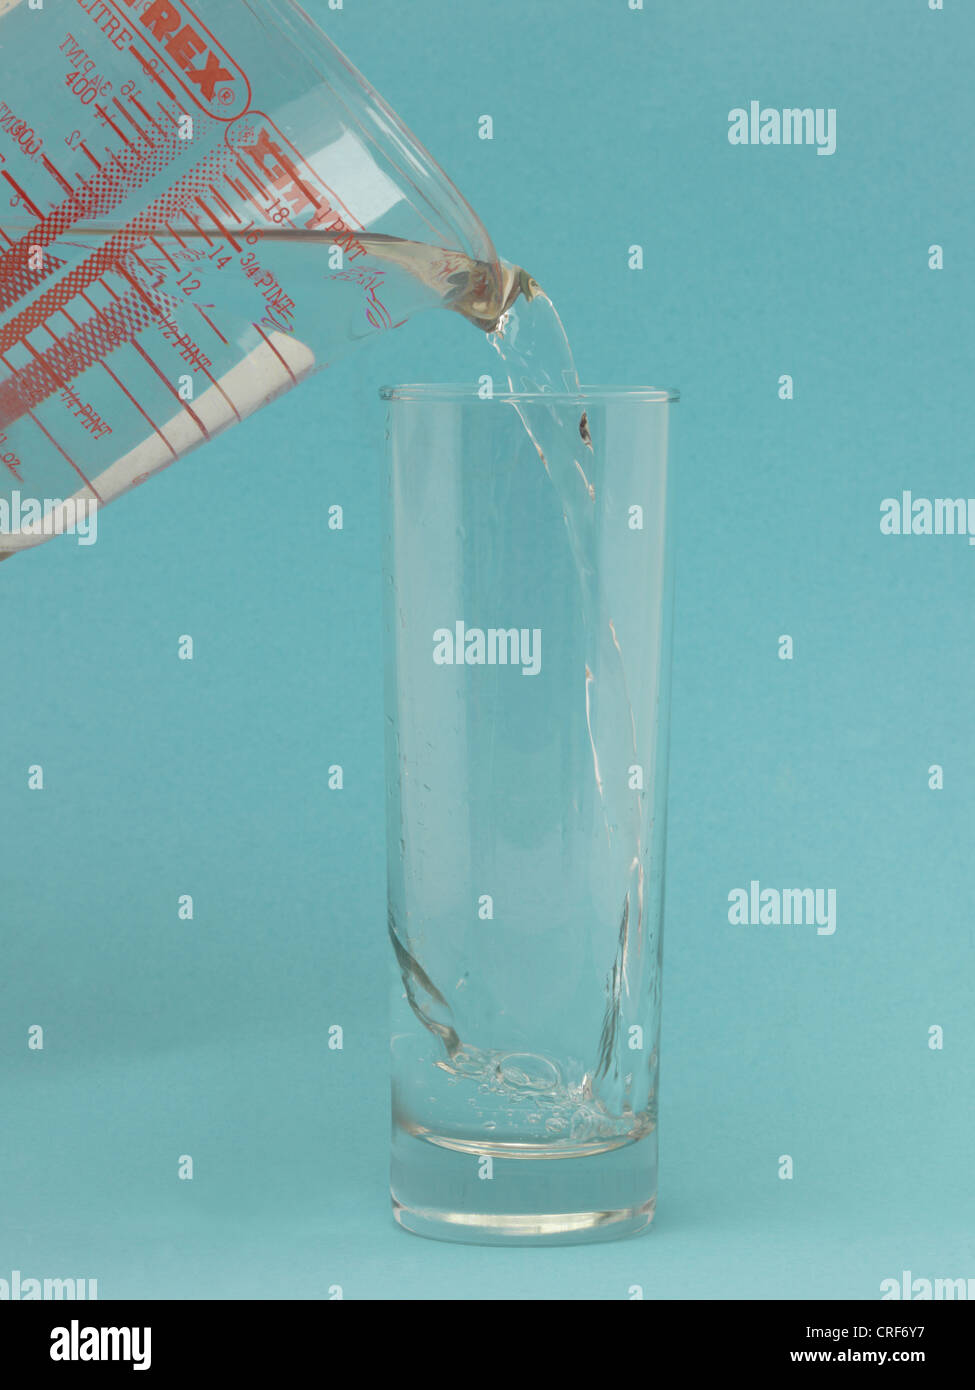 Pouring Water into a Glass Stock Photo